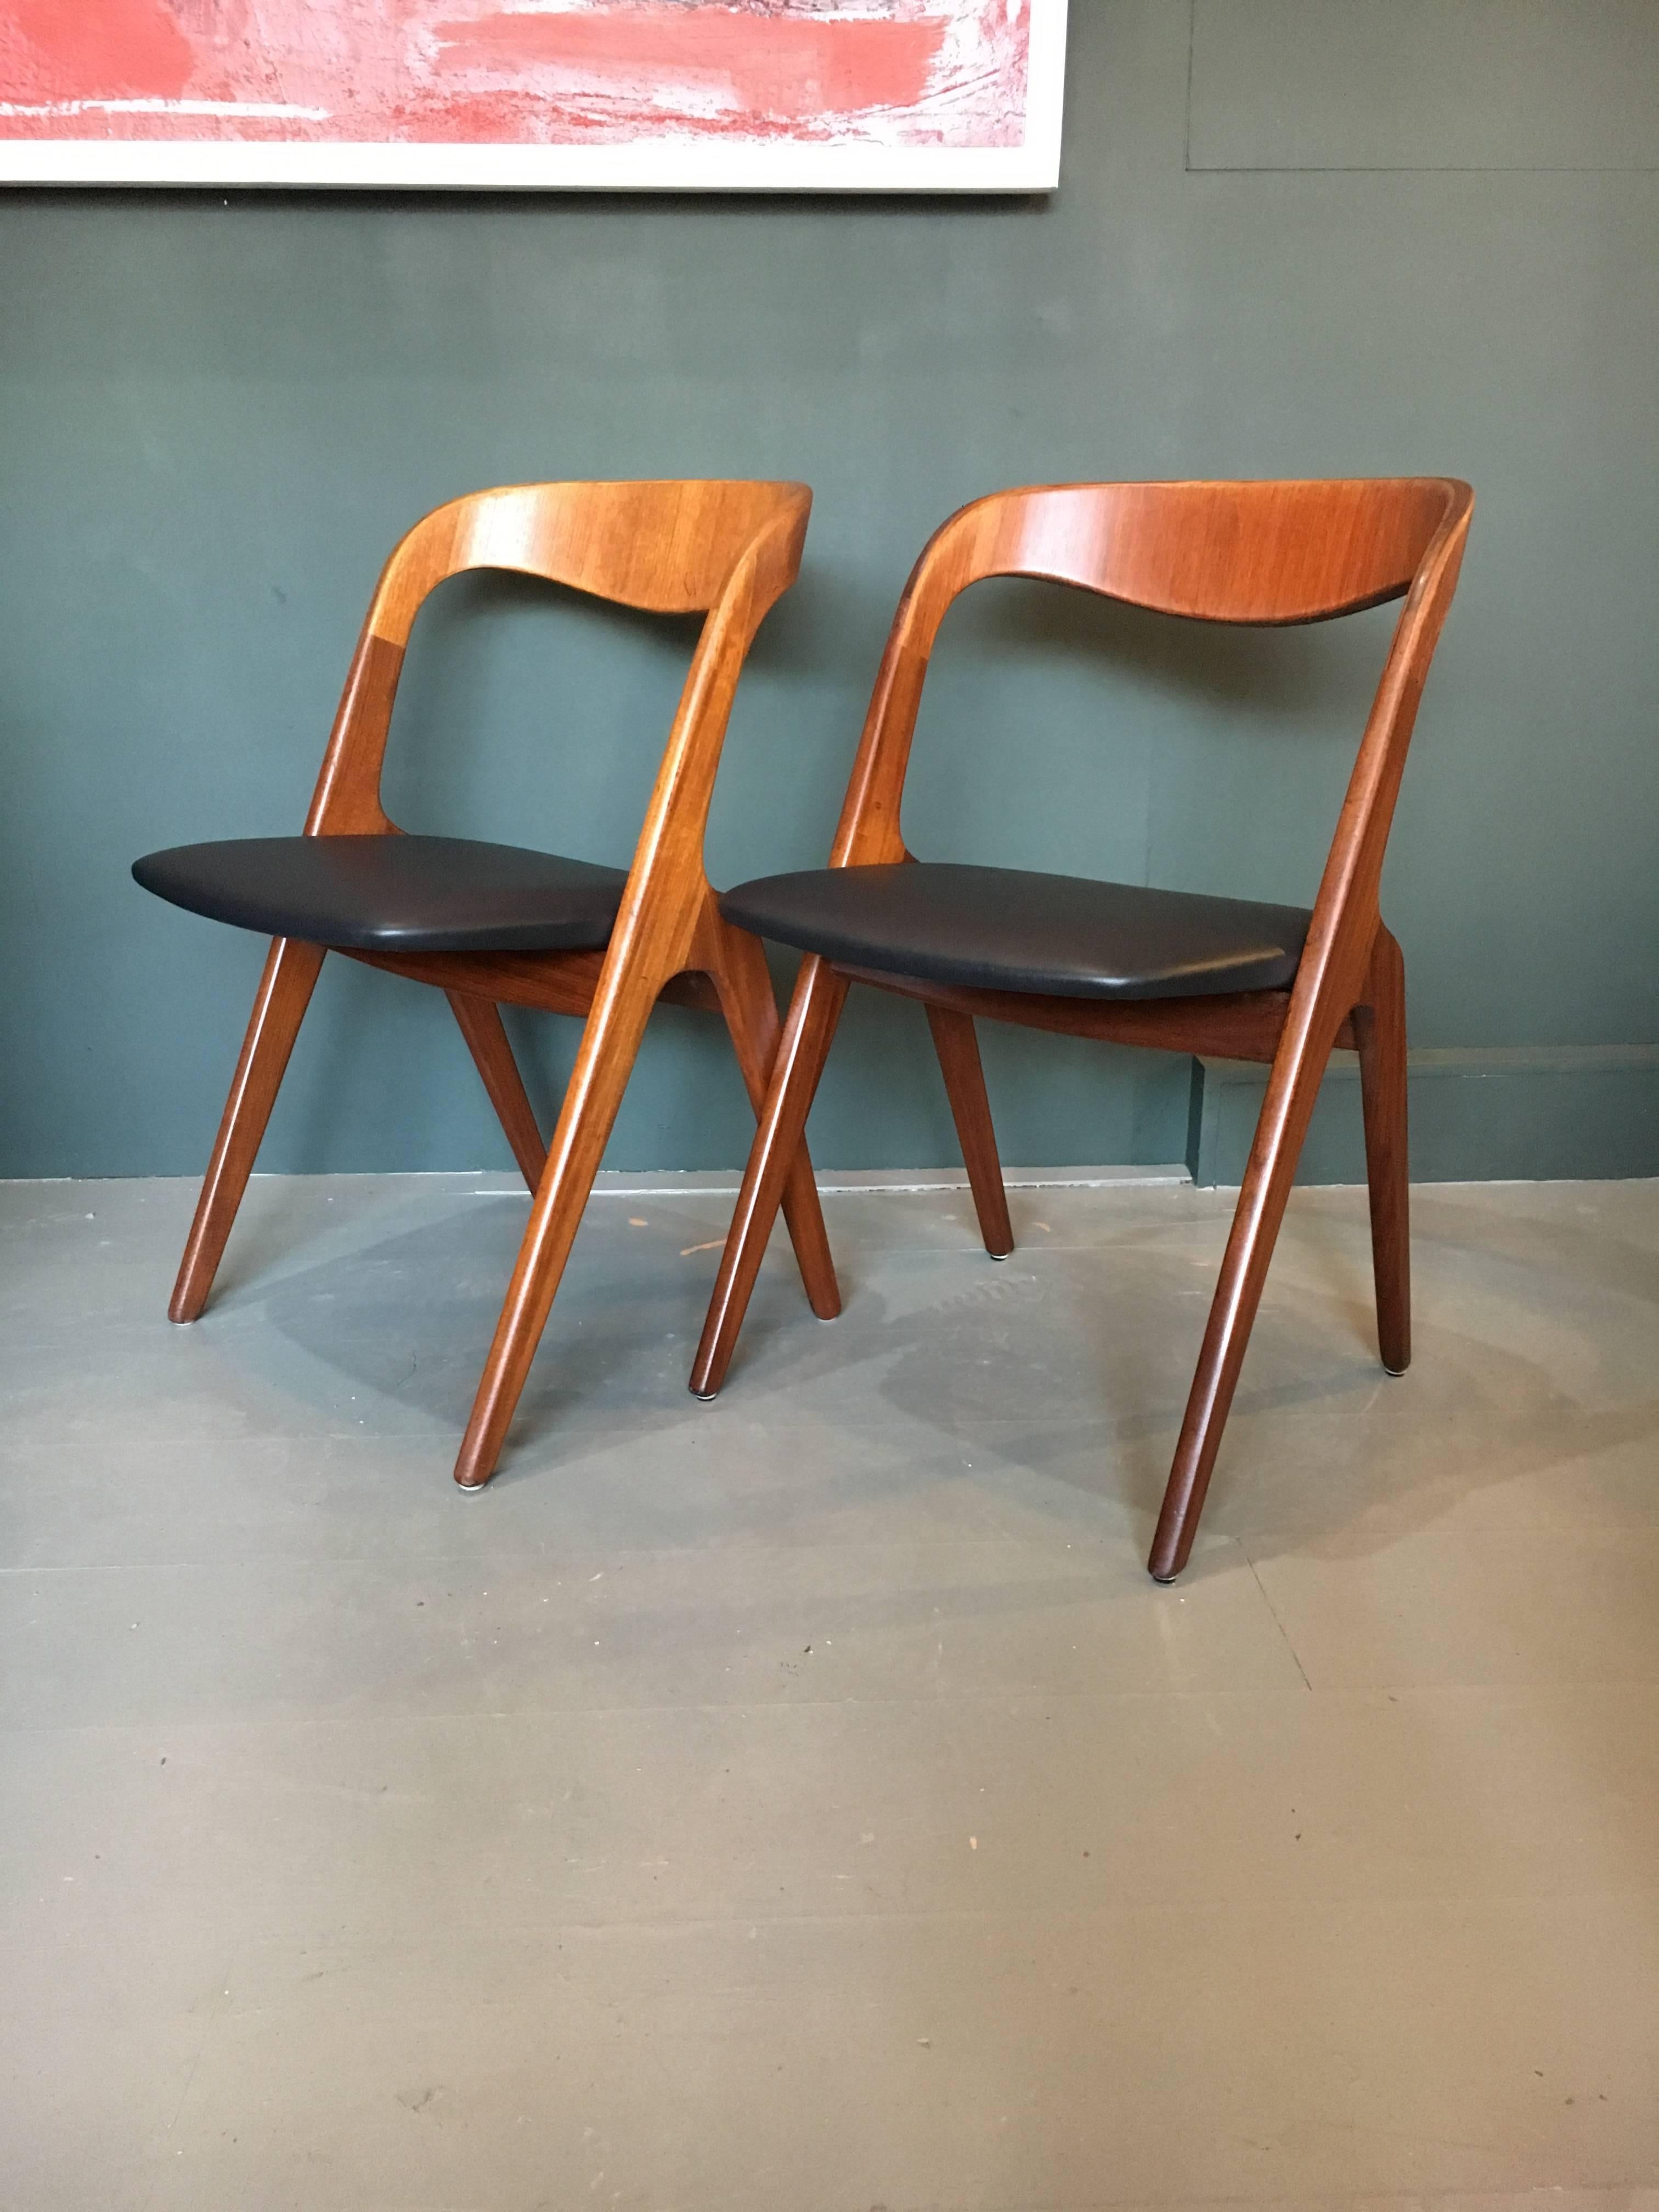 A set of ten teak Danish Midcentury dining chairs designed by Johannes Andersen for Vamo Sonderborg. Model ‘Sonja’ produced in Denmark, circa 1960. Re-oiled frames with professionally reupholstered seats of Italian black leather. Unique midcentury